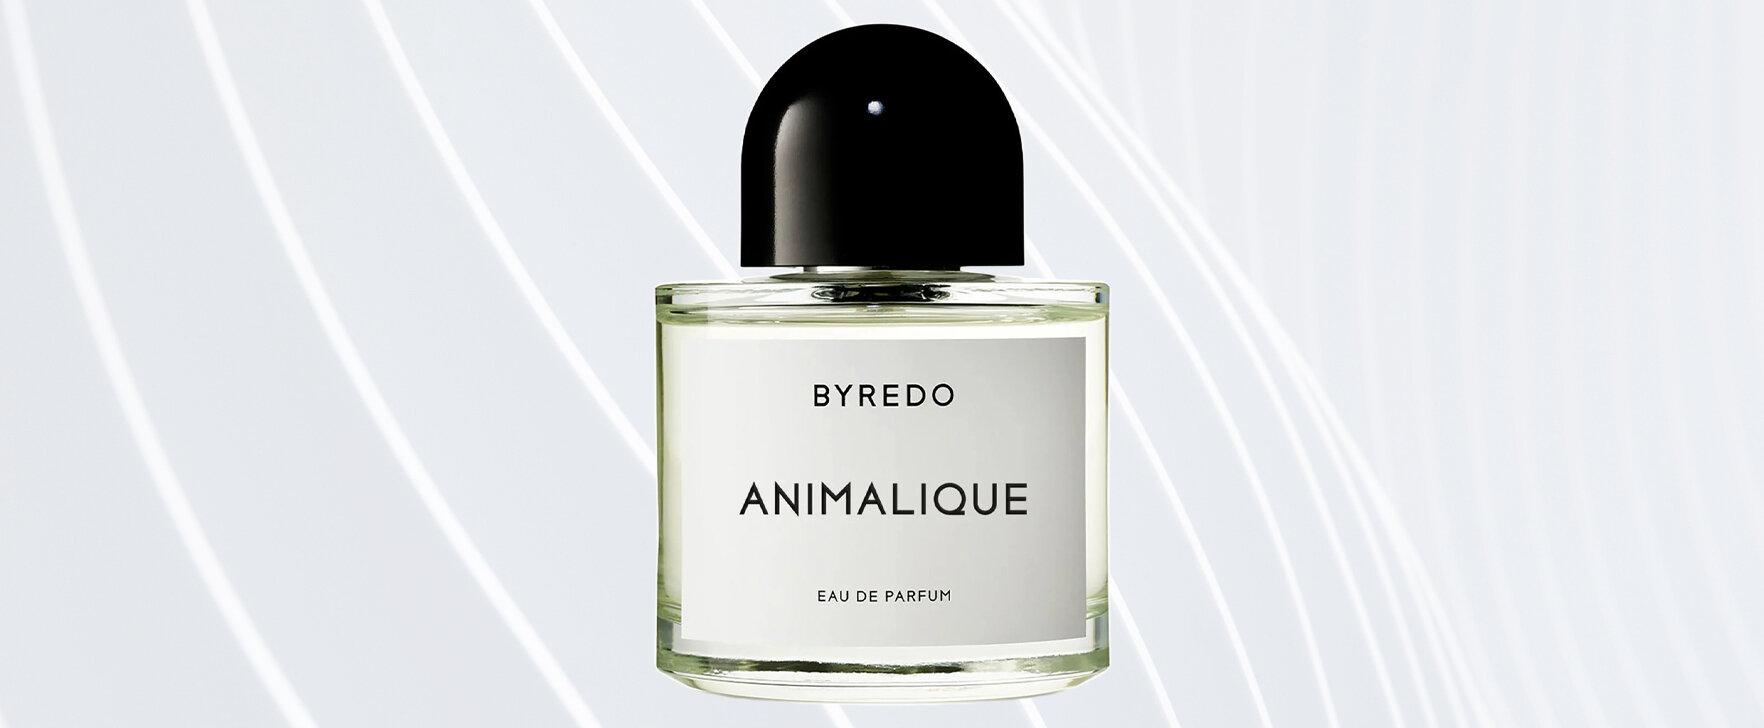 "Animalique" by Byredo: A Fragrance Ode to Our Spiritual Essence